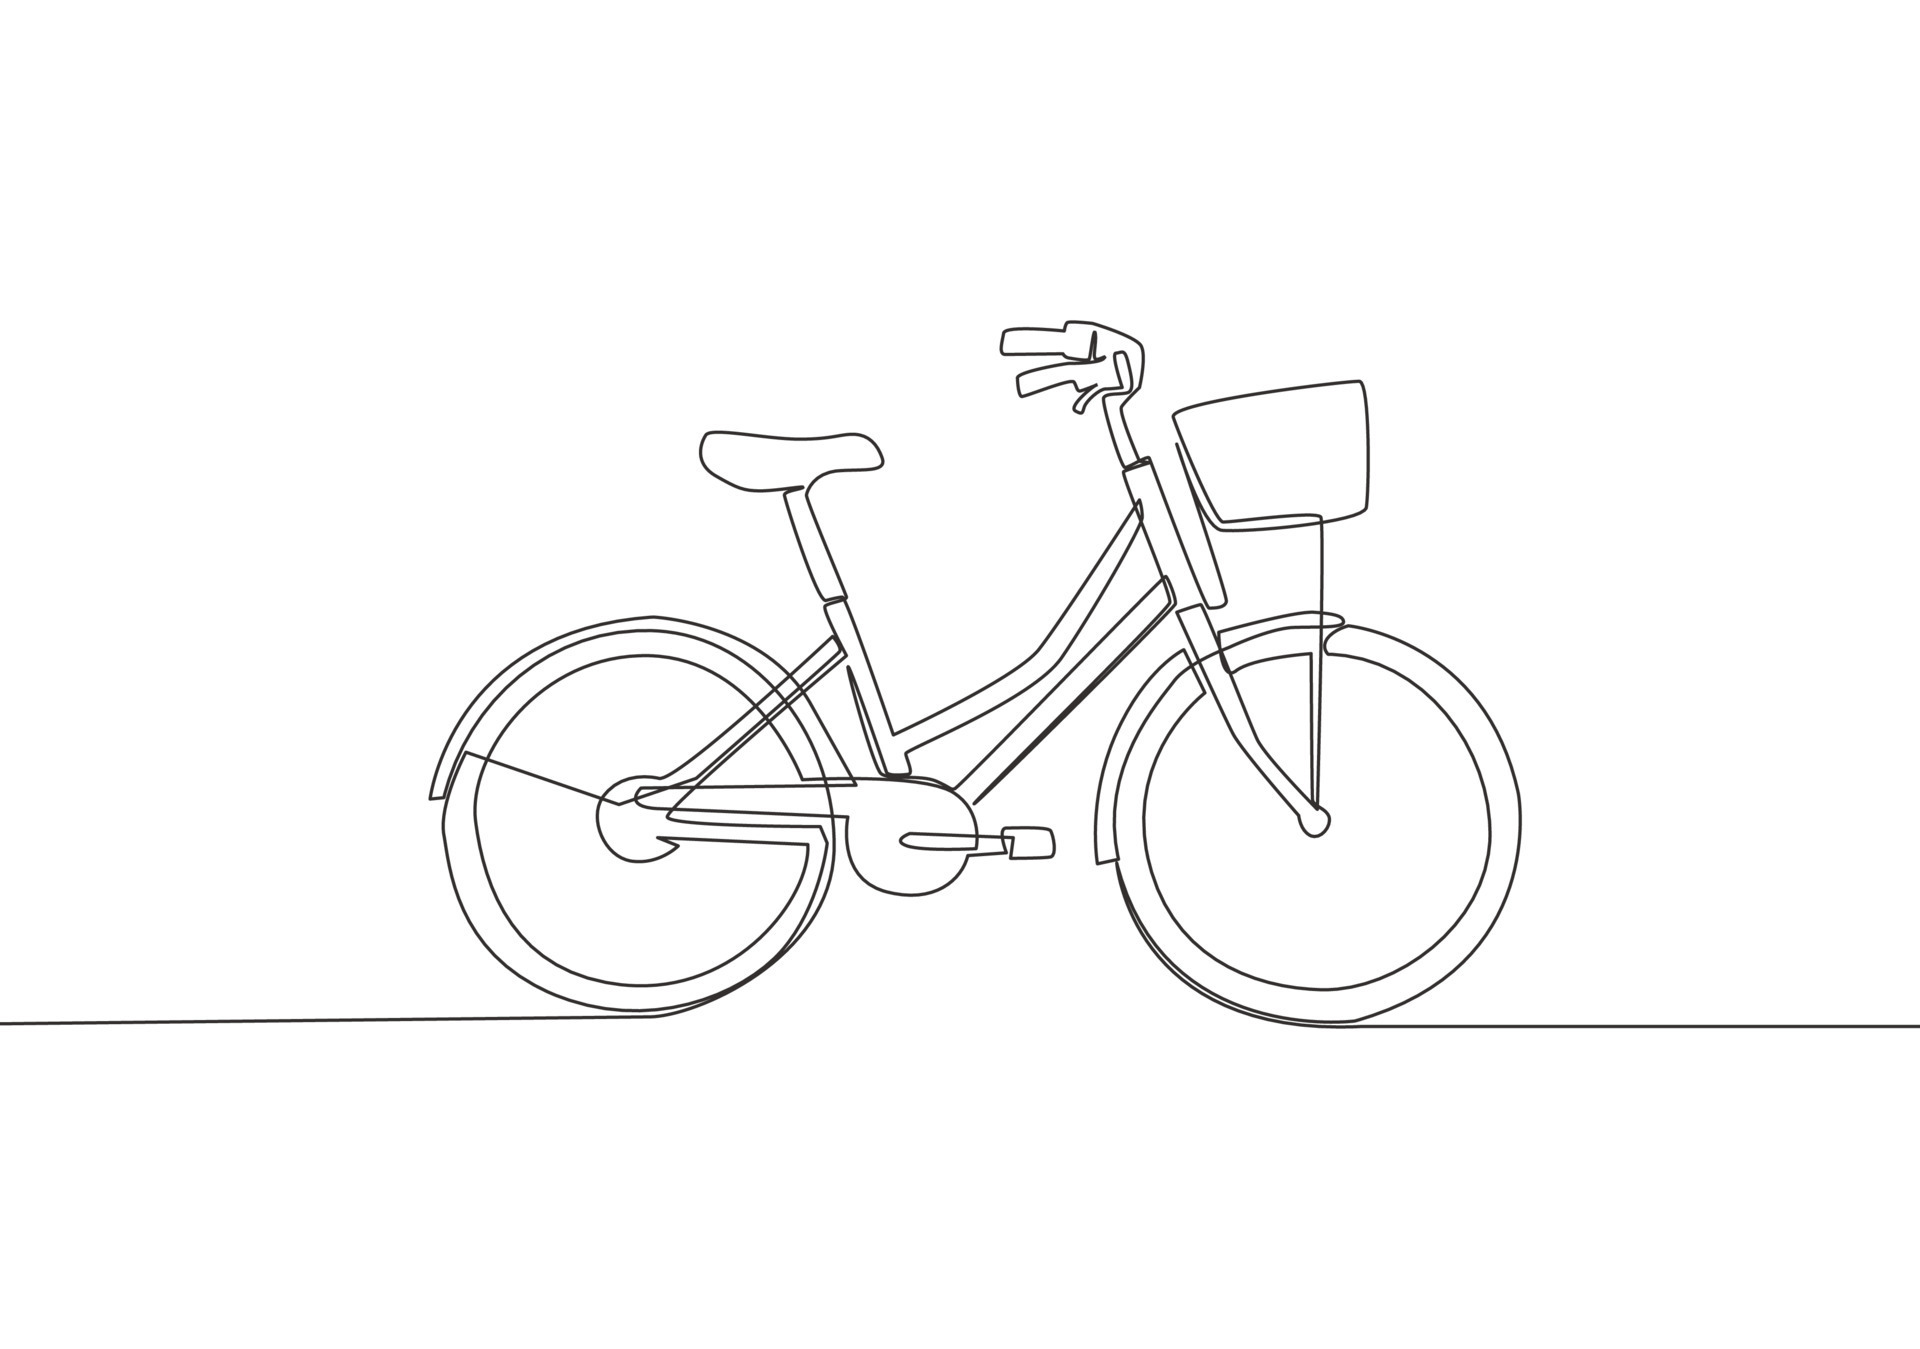 How to Draw Easy Bicycle Drawing Ideas  A Simple Bicycle Sketch For  Beginners  YouTube